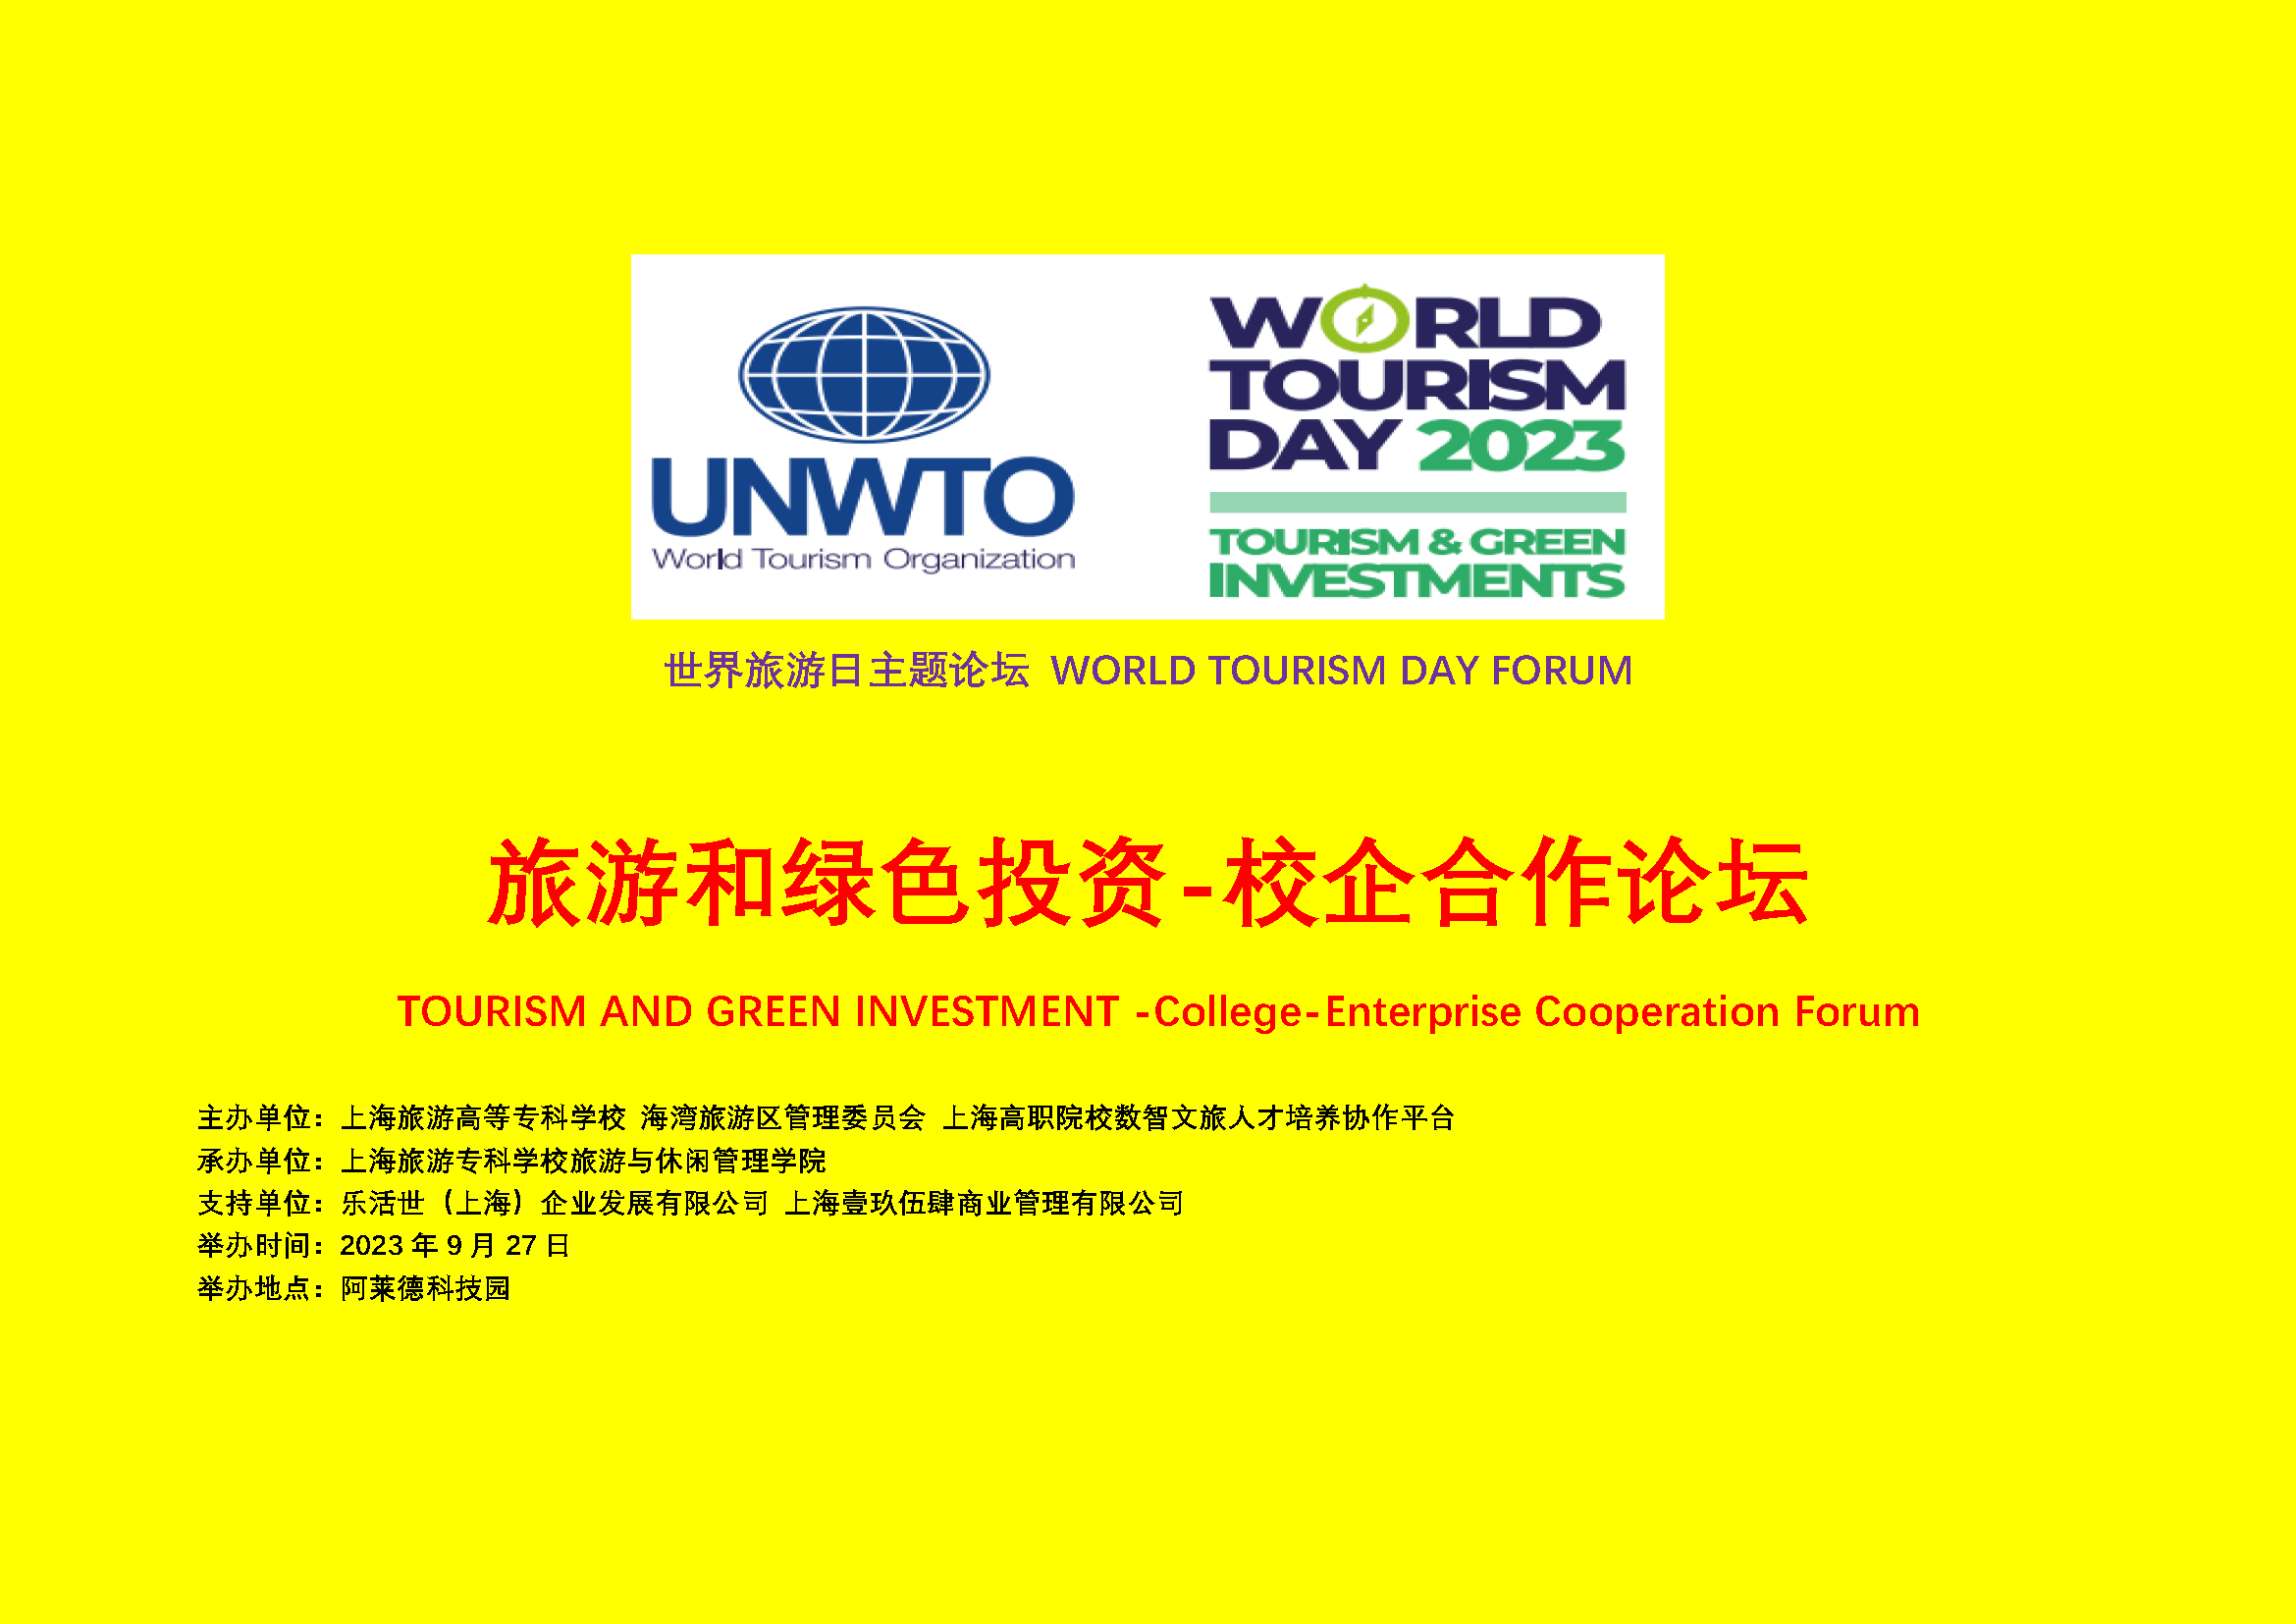 TOURISM AND GREEN INVESTMENT -College-Enterprise Cooperation Forum